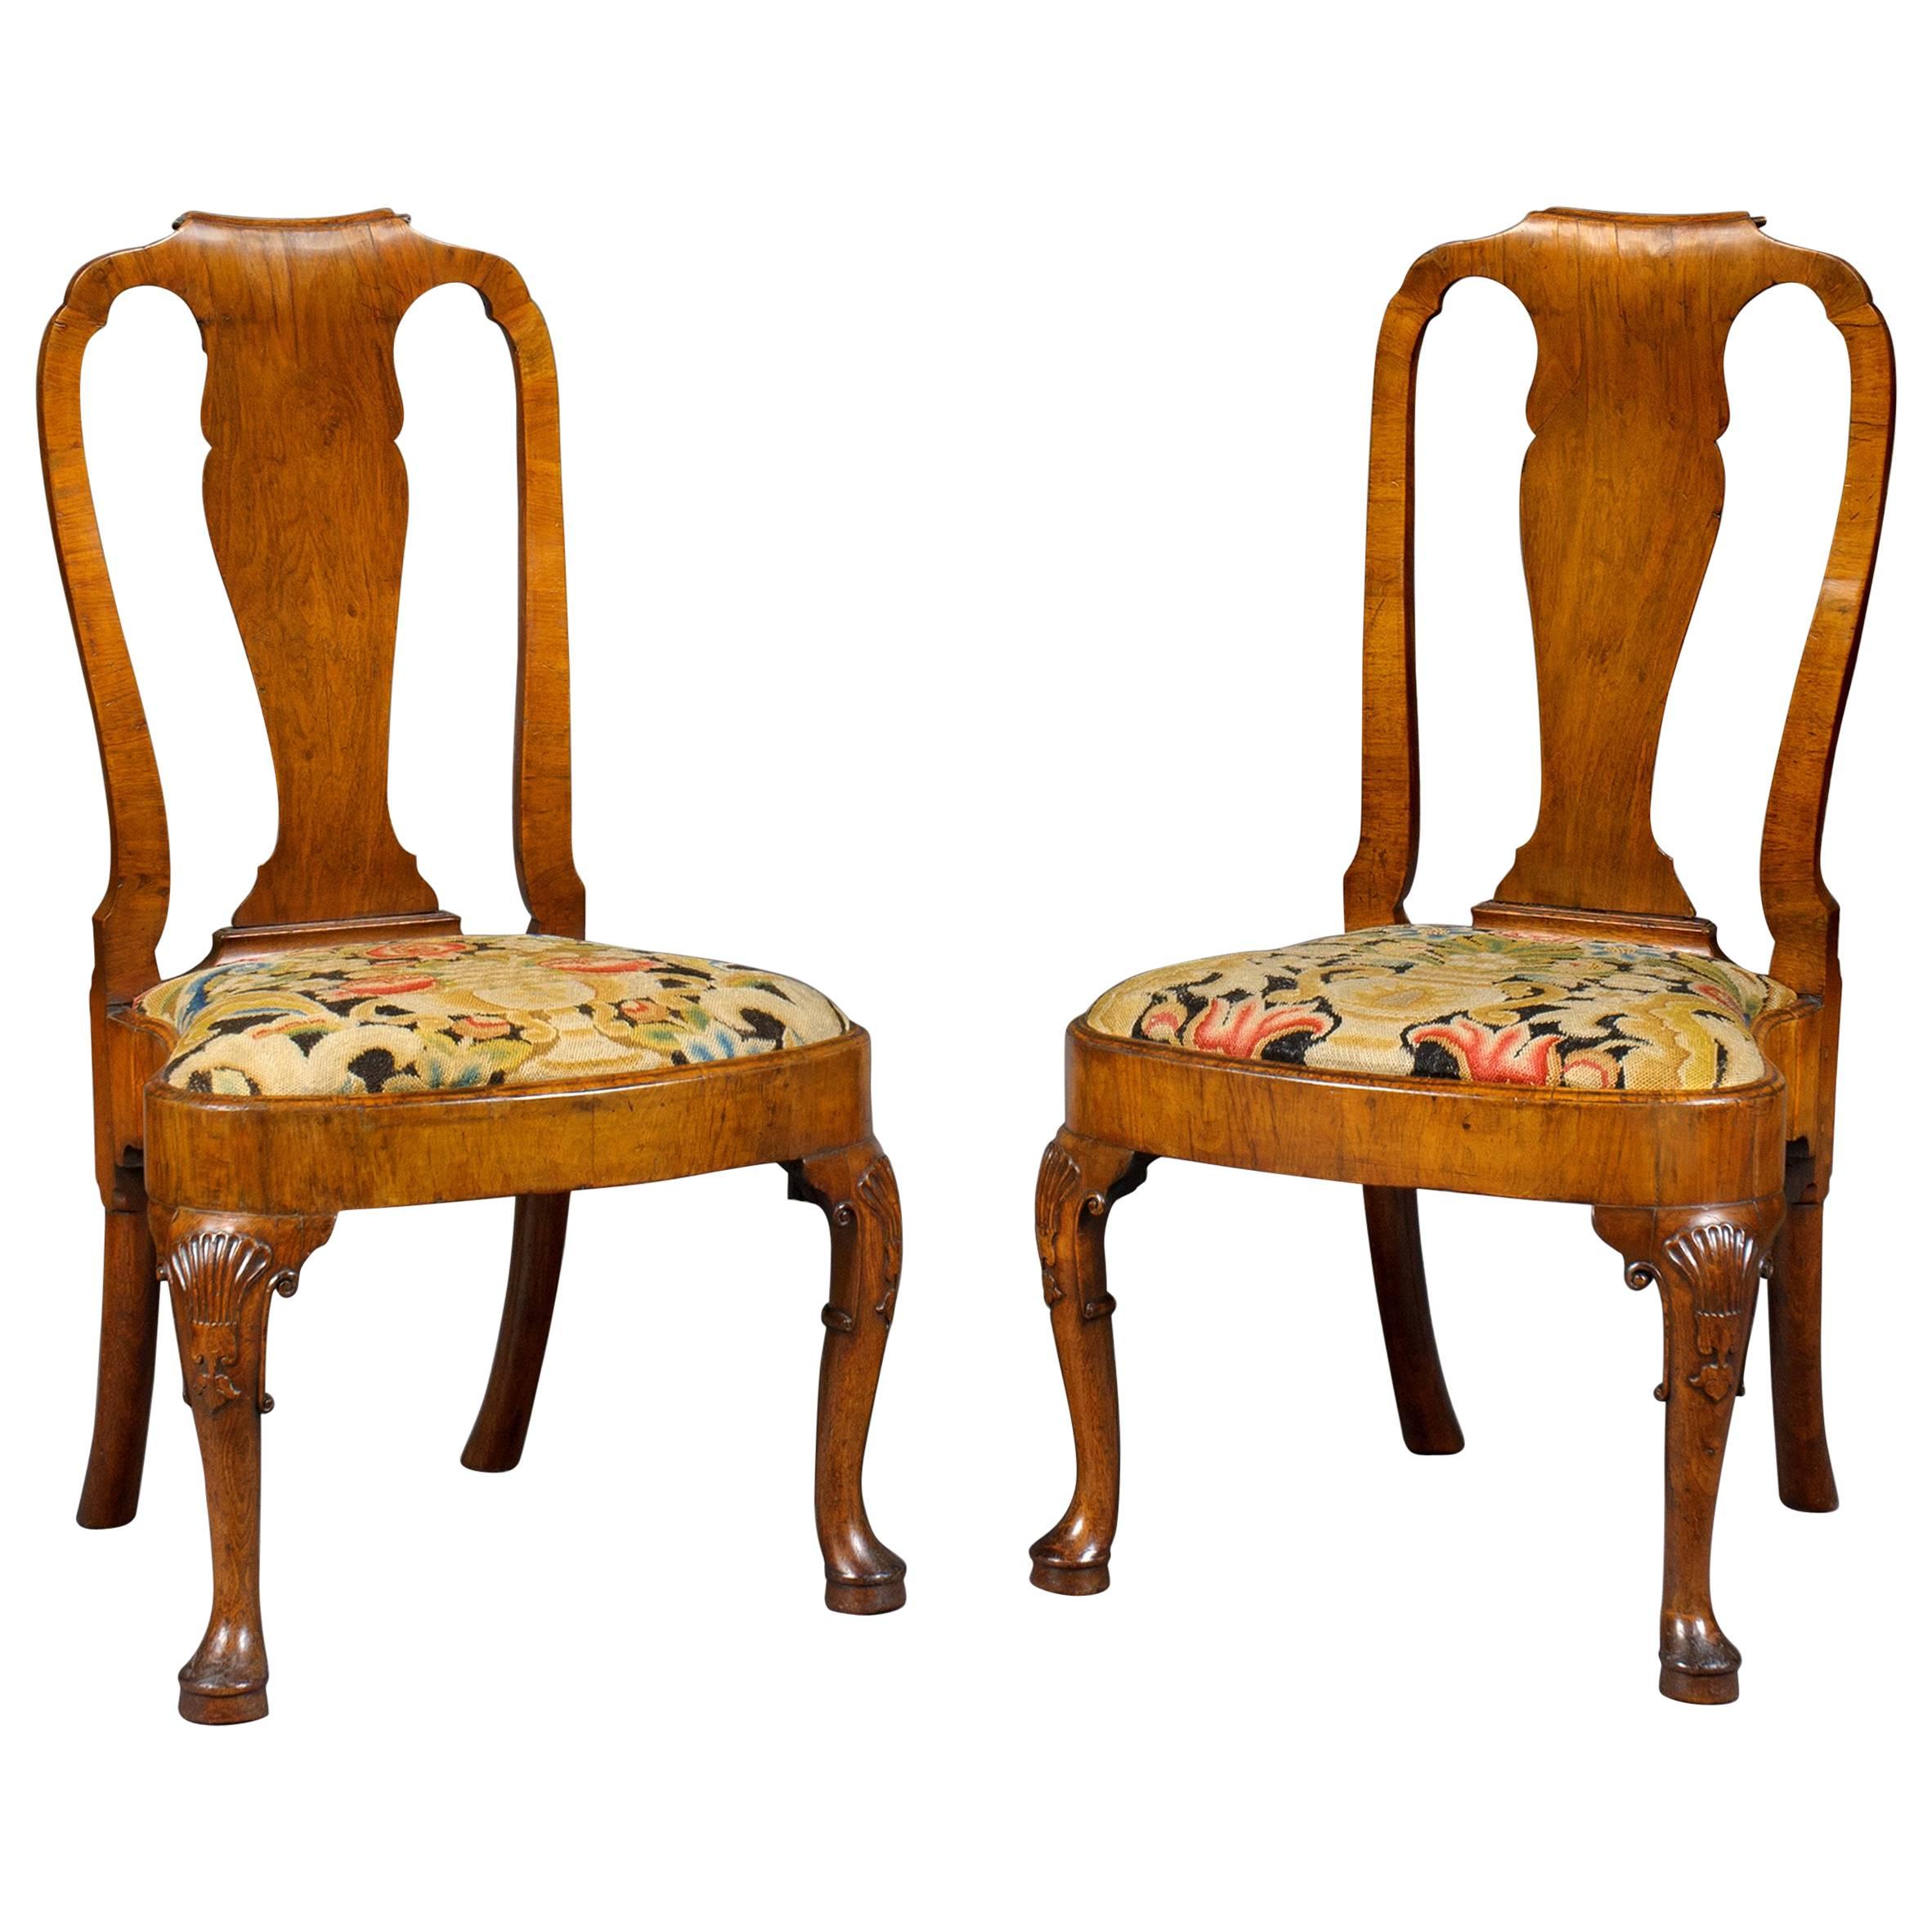 Pair of George I Period Walnut Chairs For Sale